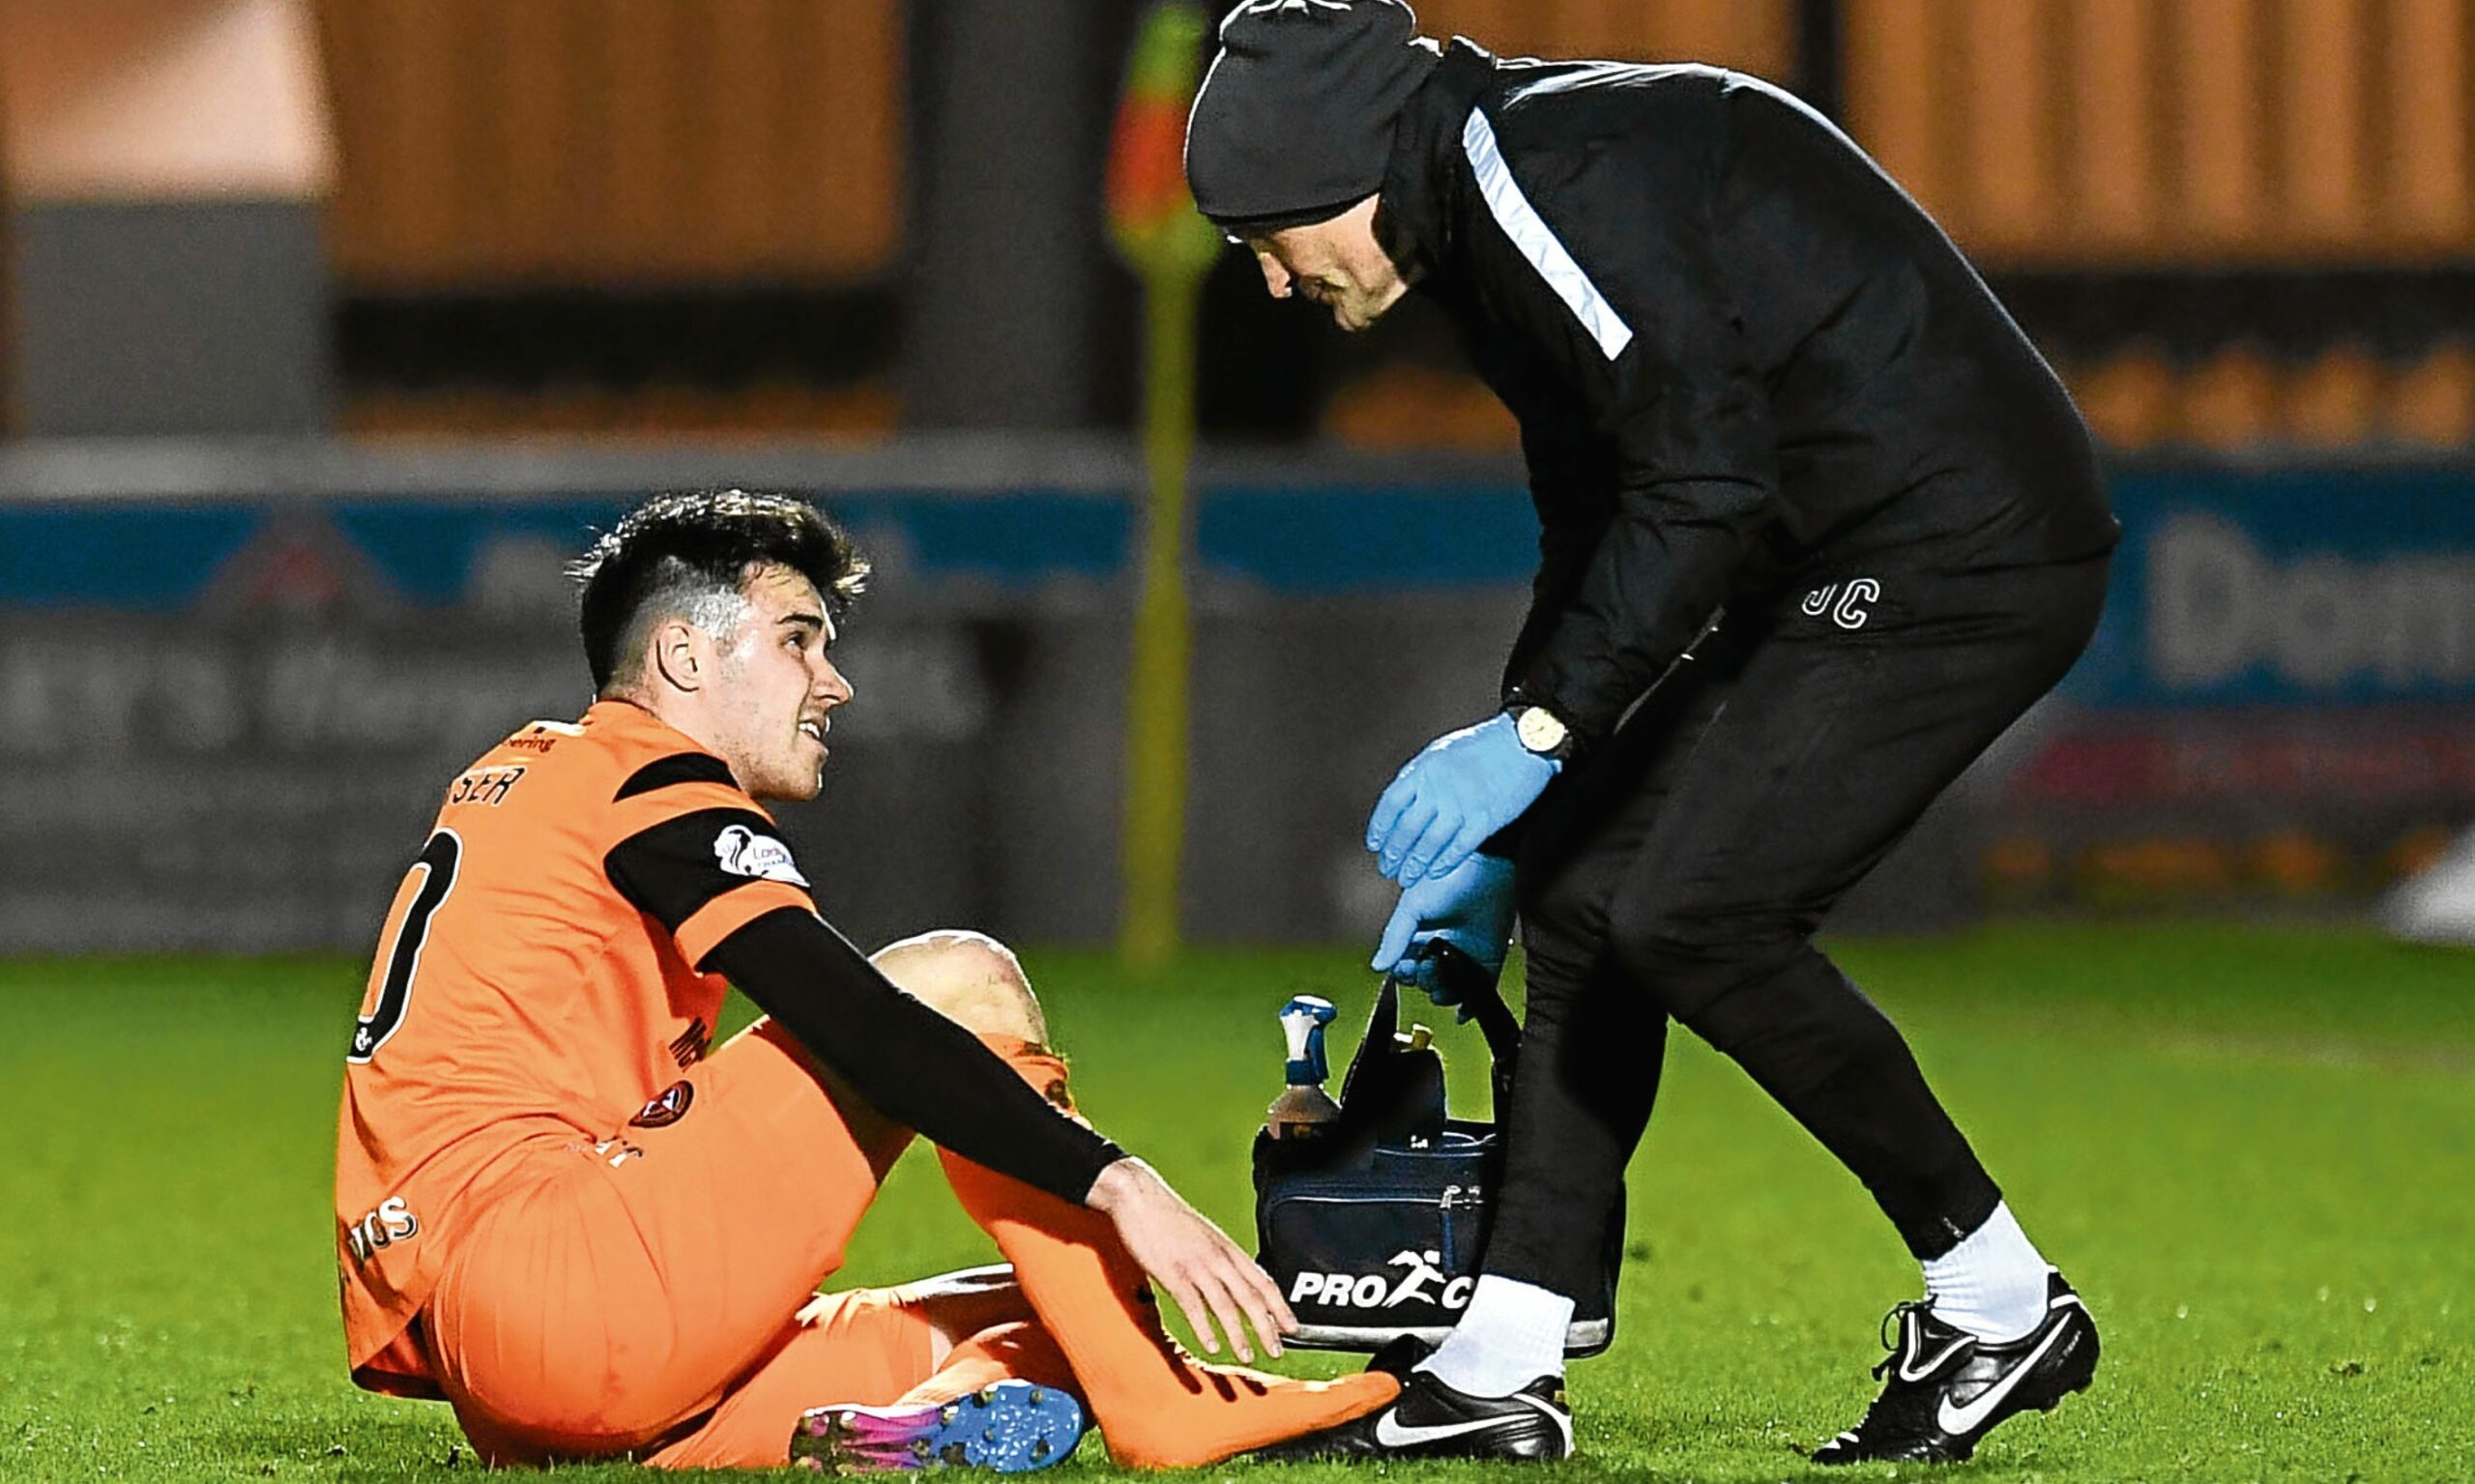 Dundee United's Scott Fraser is back in full training after breaking his foot in March